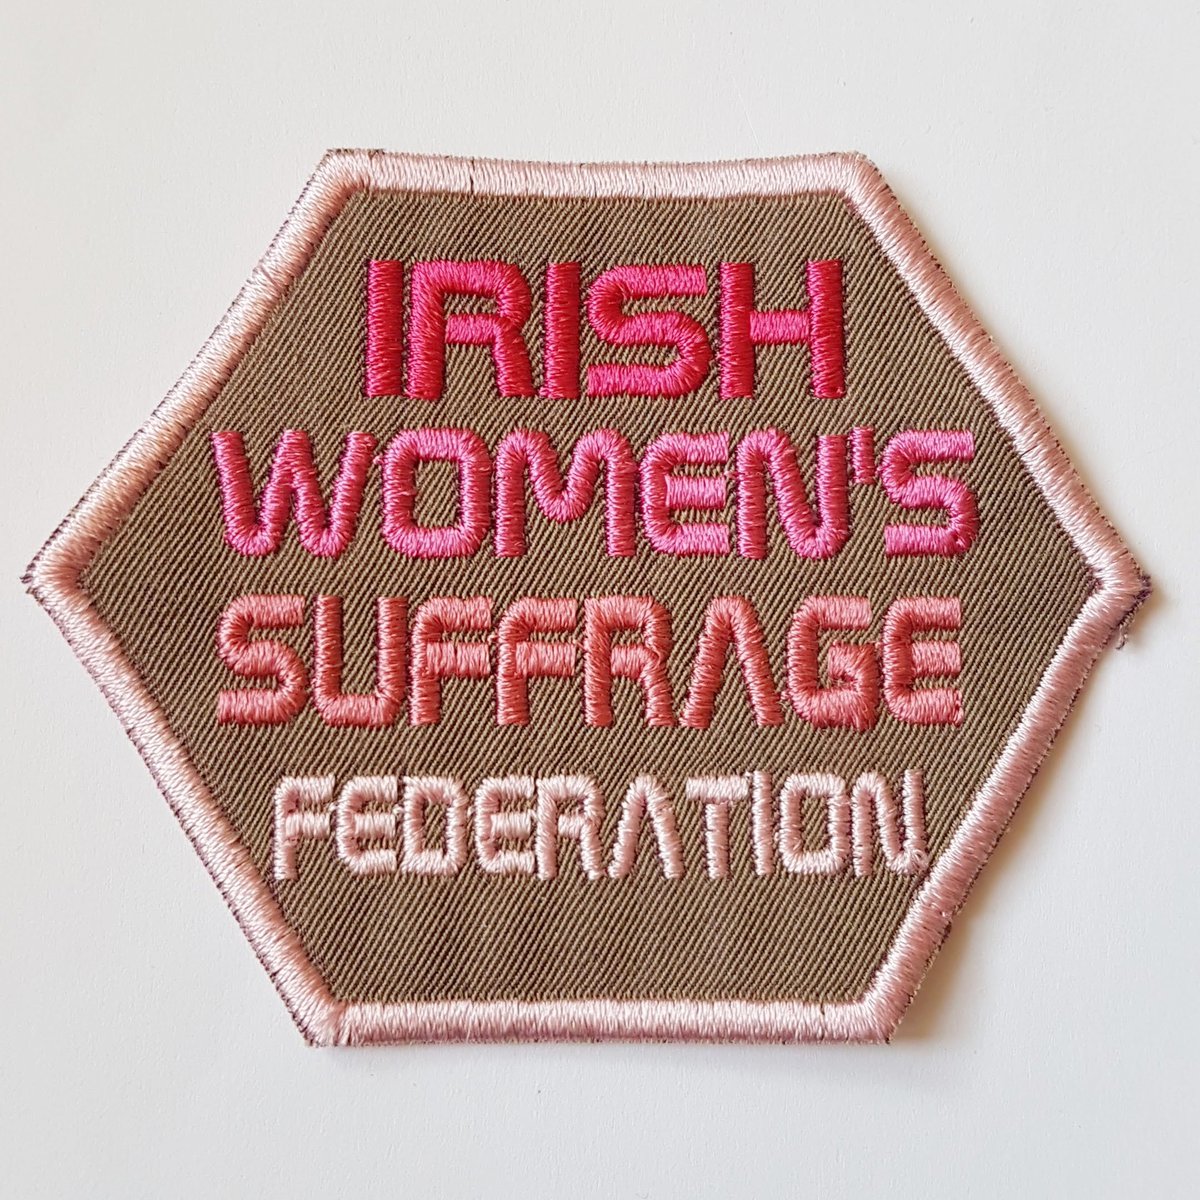 2/5These women are, from left to right, Margaret (Meg) Connery, Mabel Purser, Barbara Hoskins, & Margaret Cousins. They were all involved in the campaign for women's suffrage in Ireland. The Irish Women's Suffrage Federation was formed on August 21st, 1911. #IrishWomenInHistory